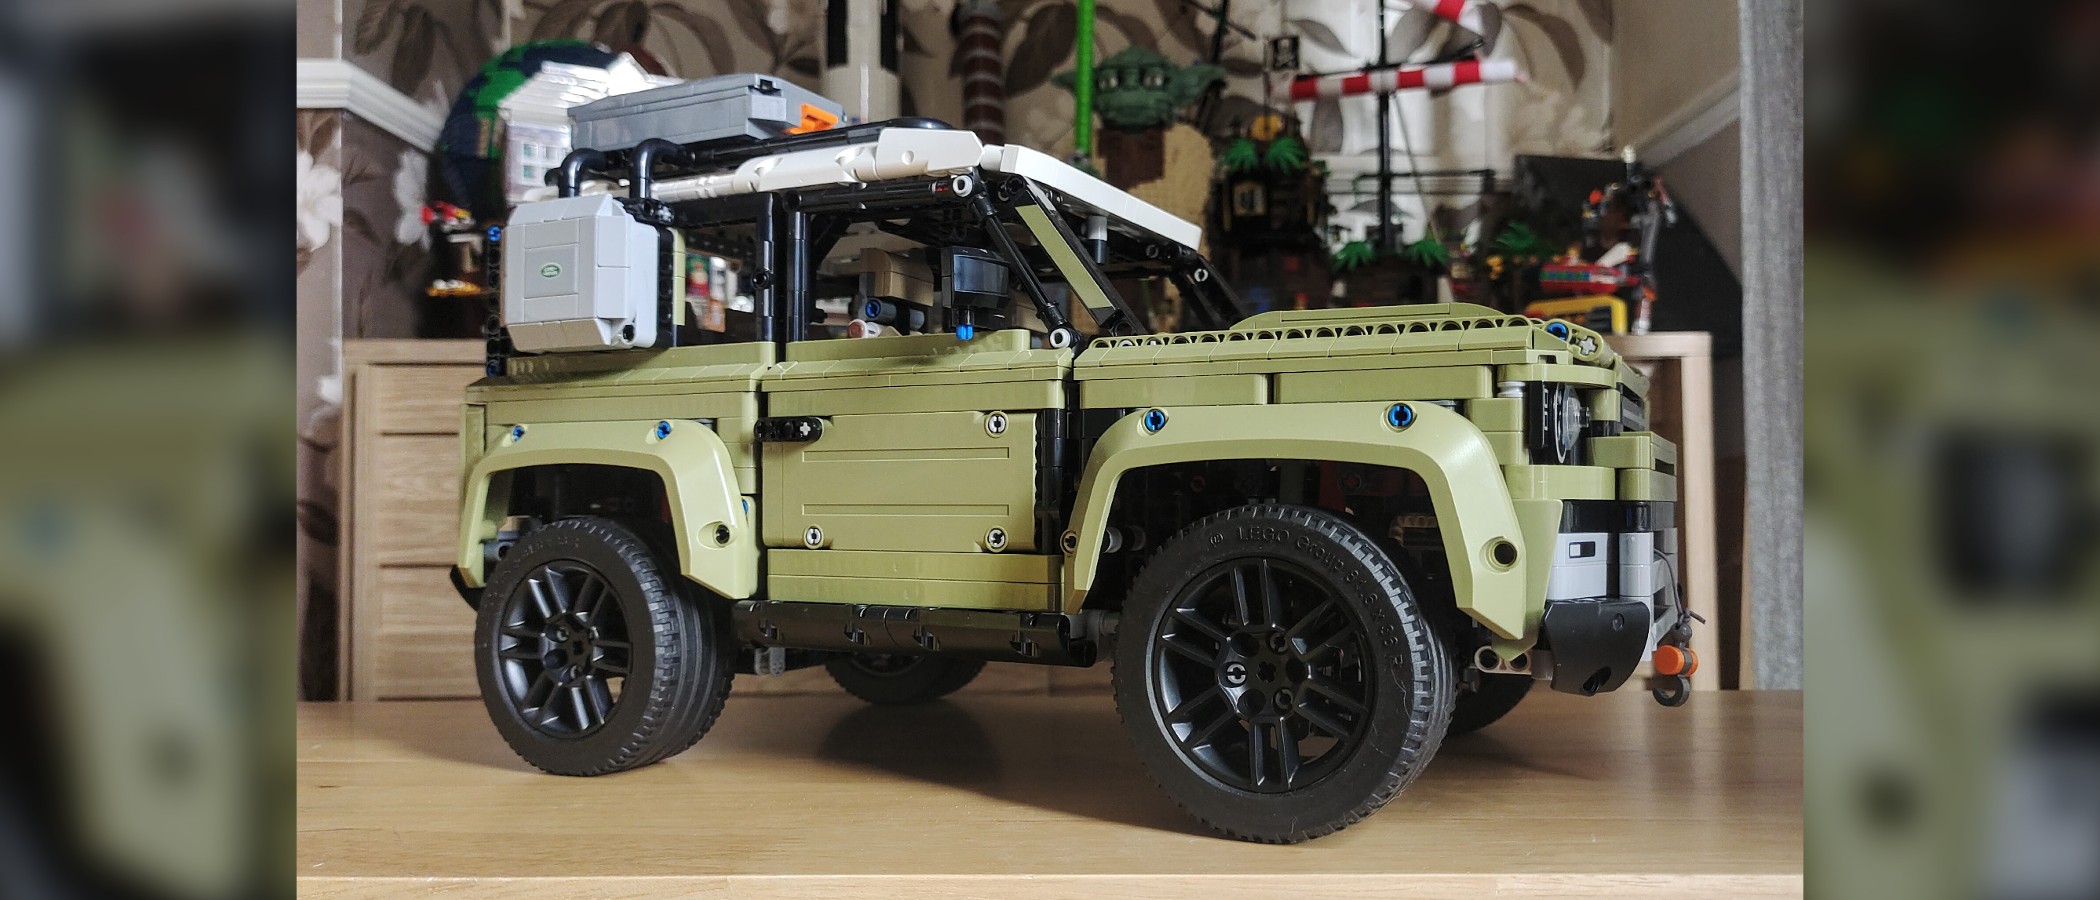 Lego Technic Land Rover Defender review